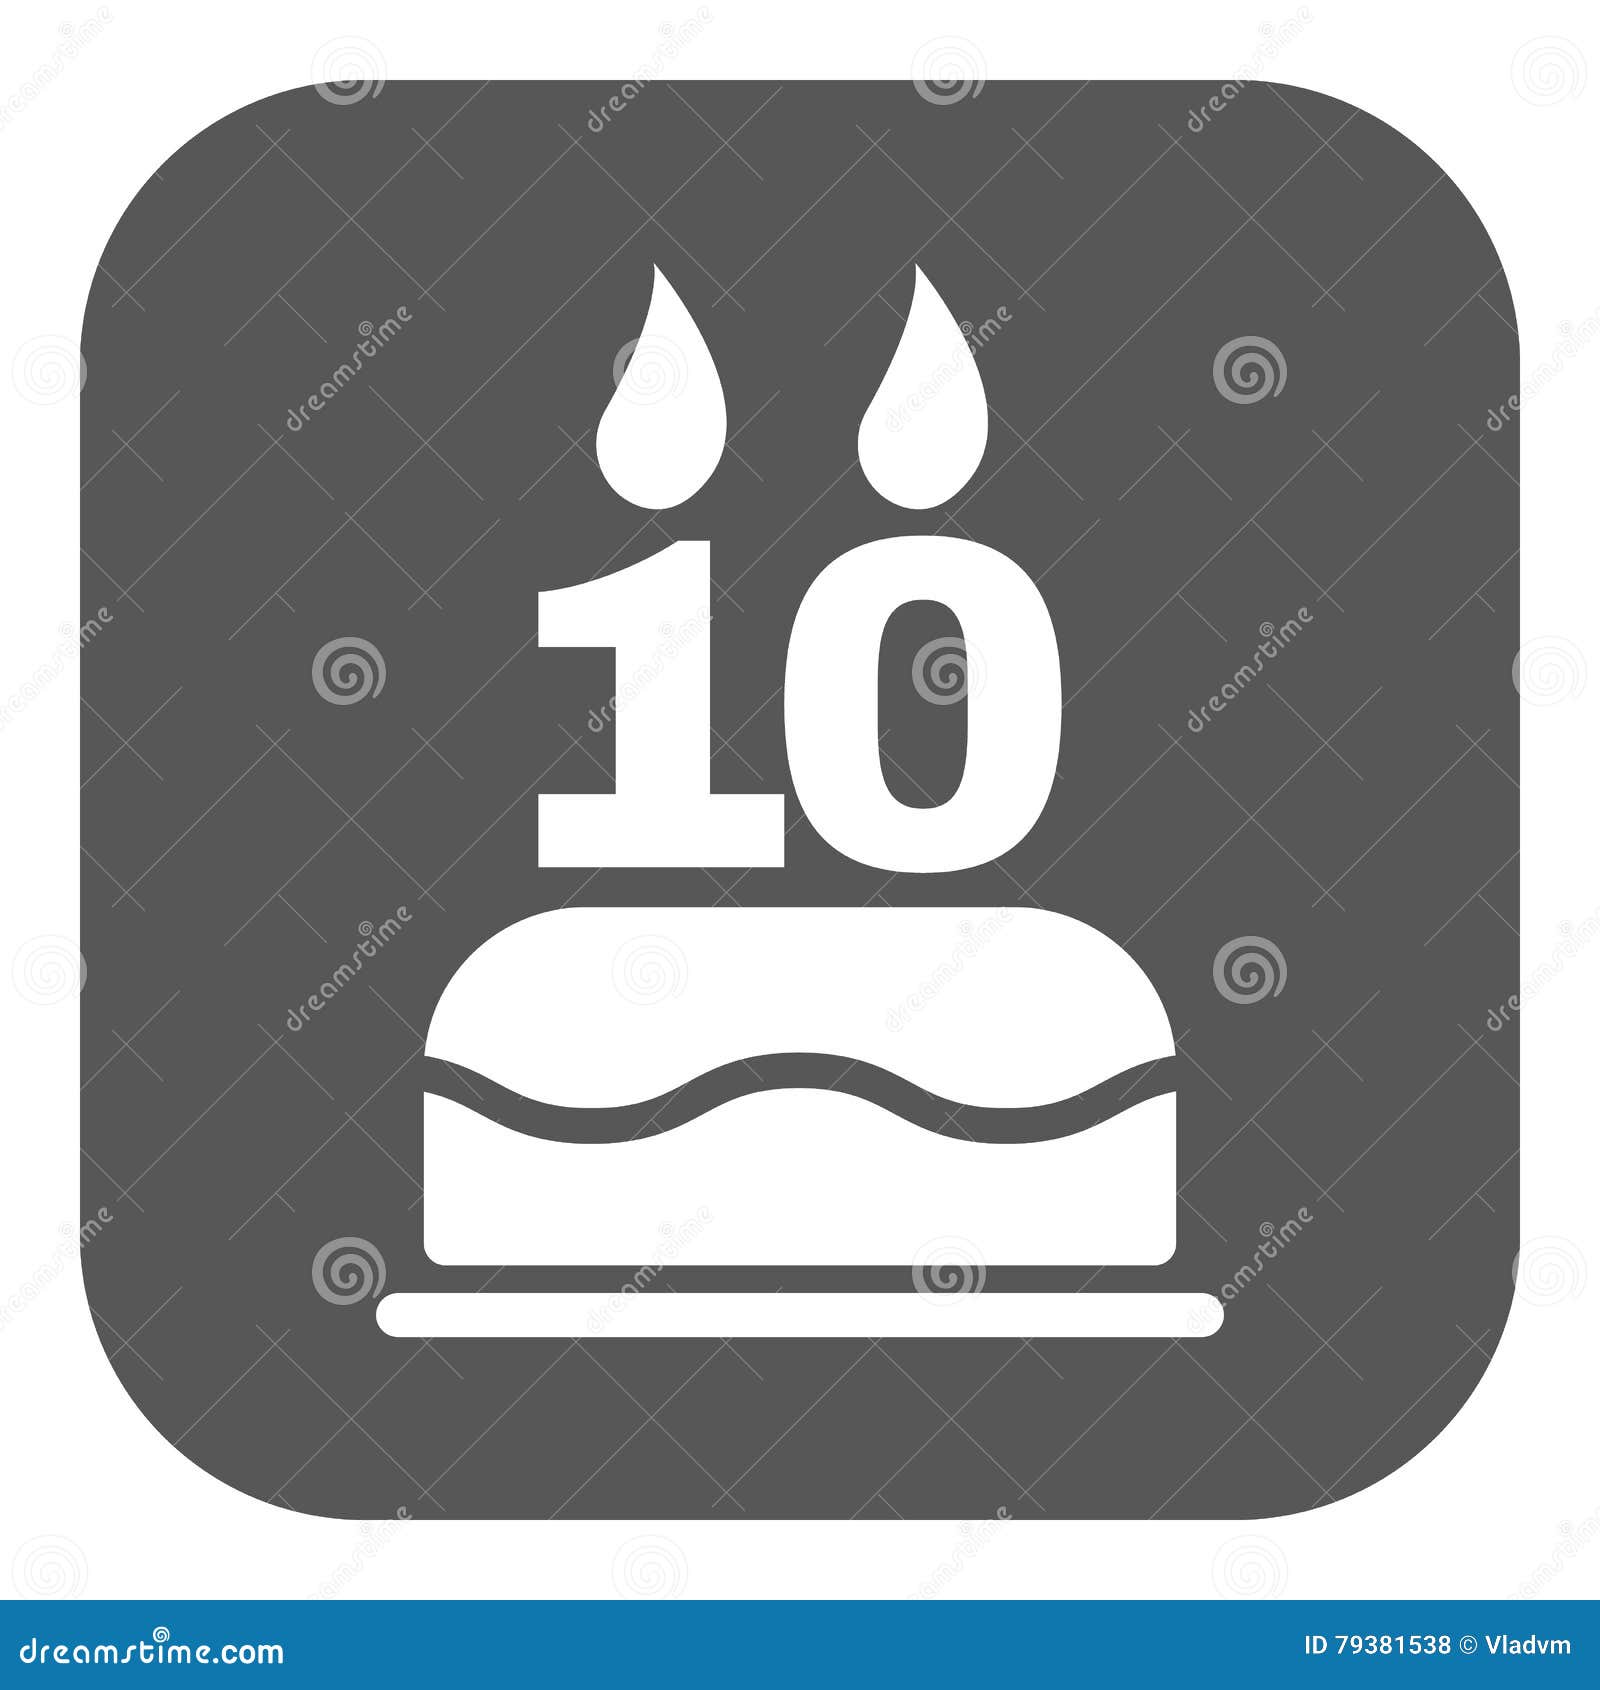 The Birthday Cake with Candles in the Form of Number 15 Icon. Birthday  Symbol Stock Vector - Illustration of number, muffin: 79384755